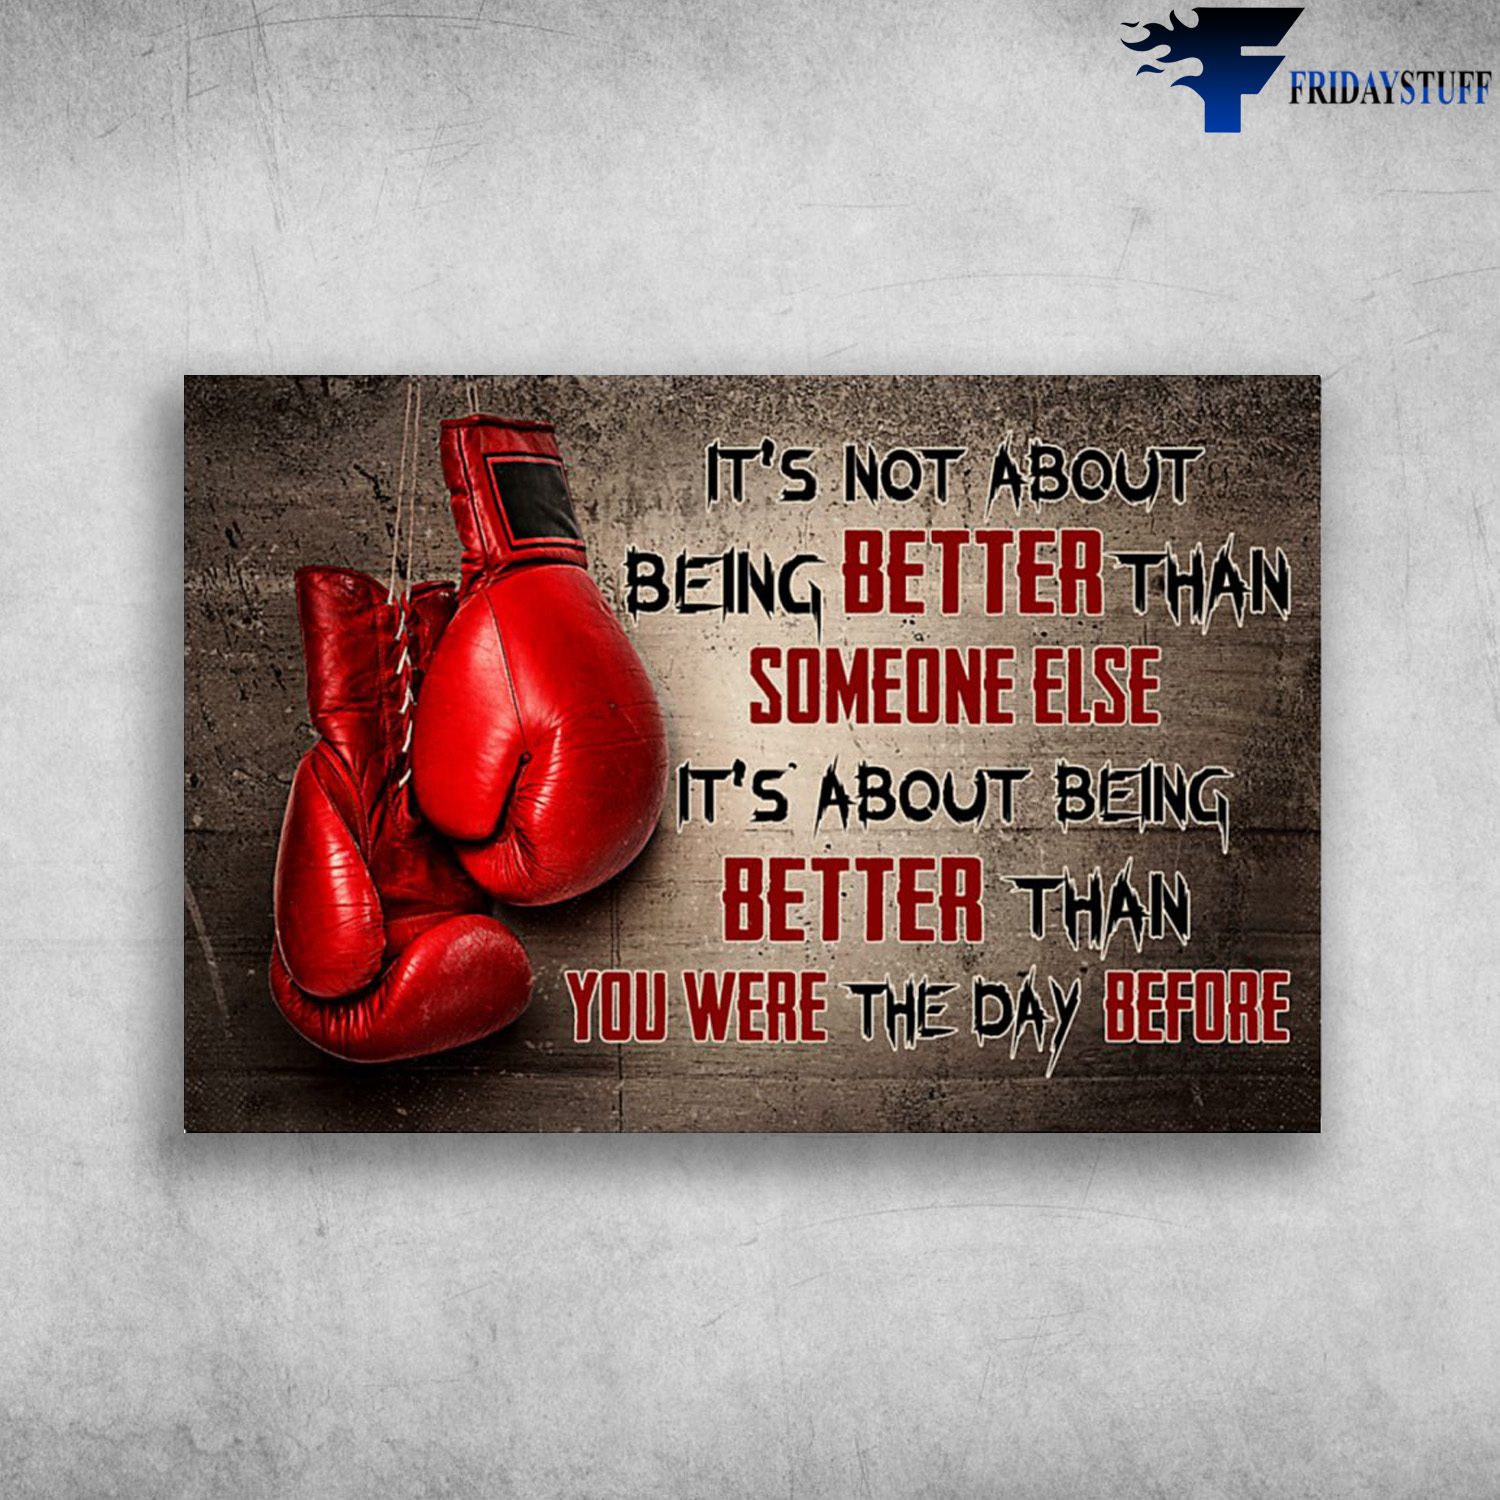 The Boxing Gloves - It's Not About Being Better Than Someone Else, It's About Being Better Than You Were The Day Before